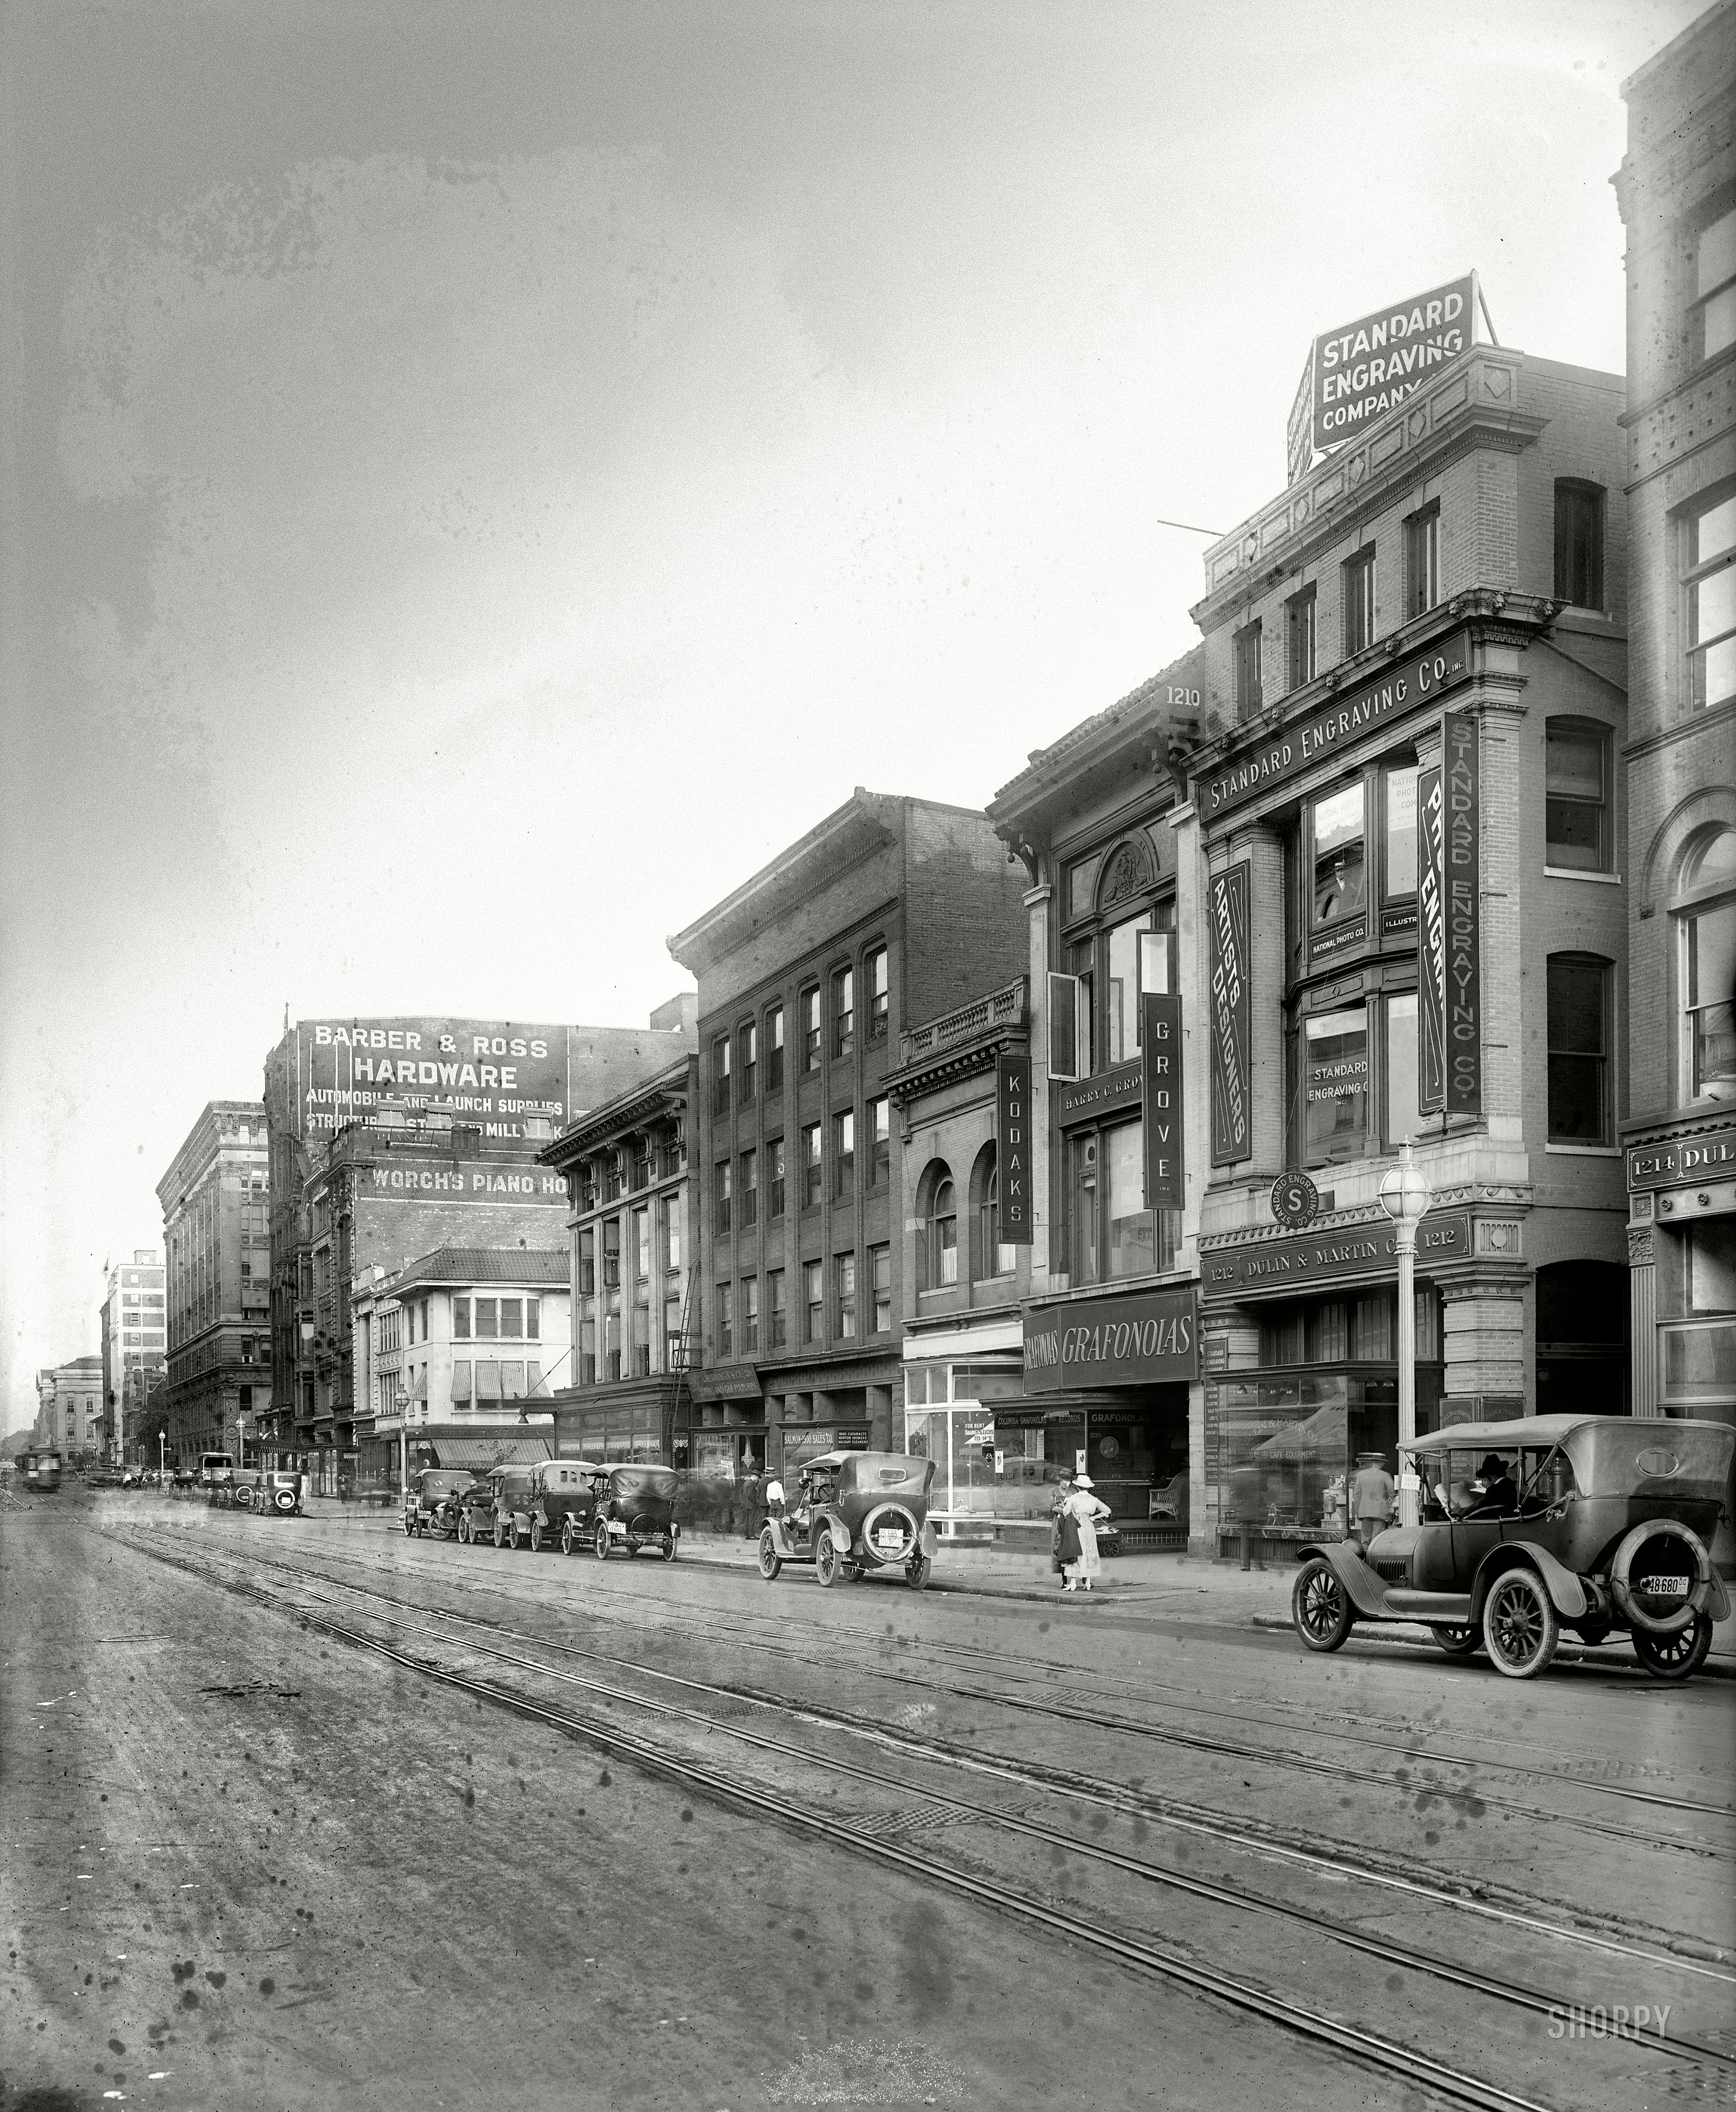 Washington, D.C., circa 1920. "Standard Engraving building, 1212 G Street." Looking down the street seen in the previous post, in the opposite direction. National Photo Company Collection glass negative. View full size.